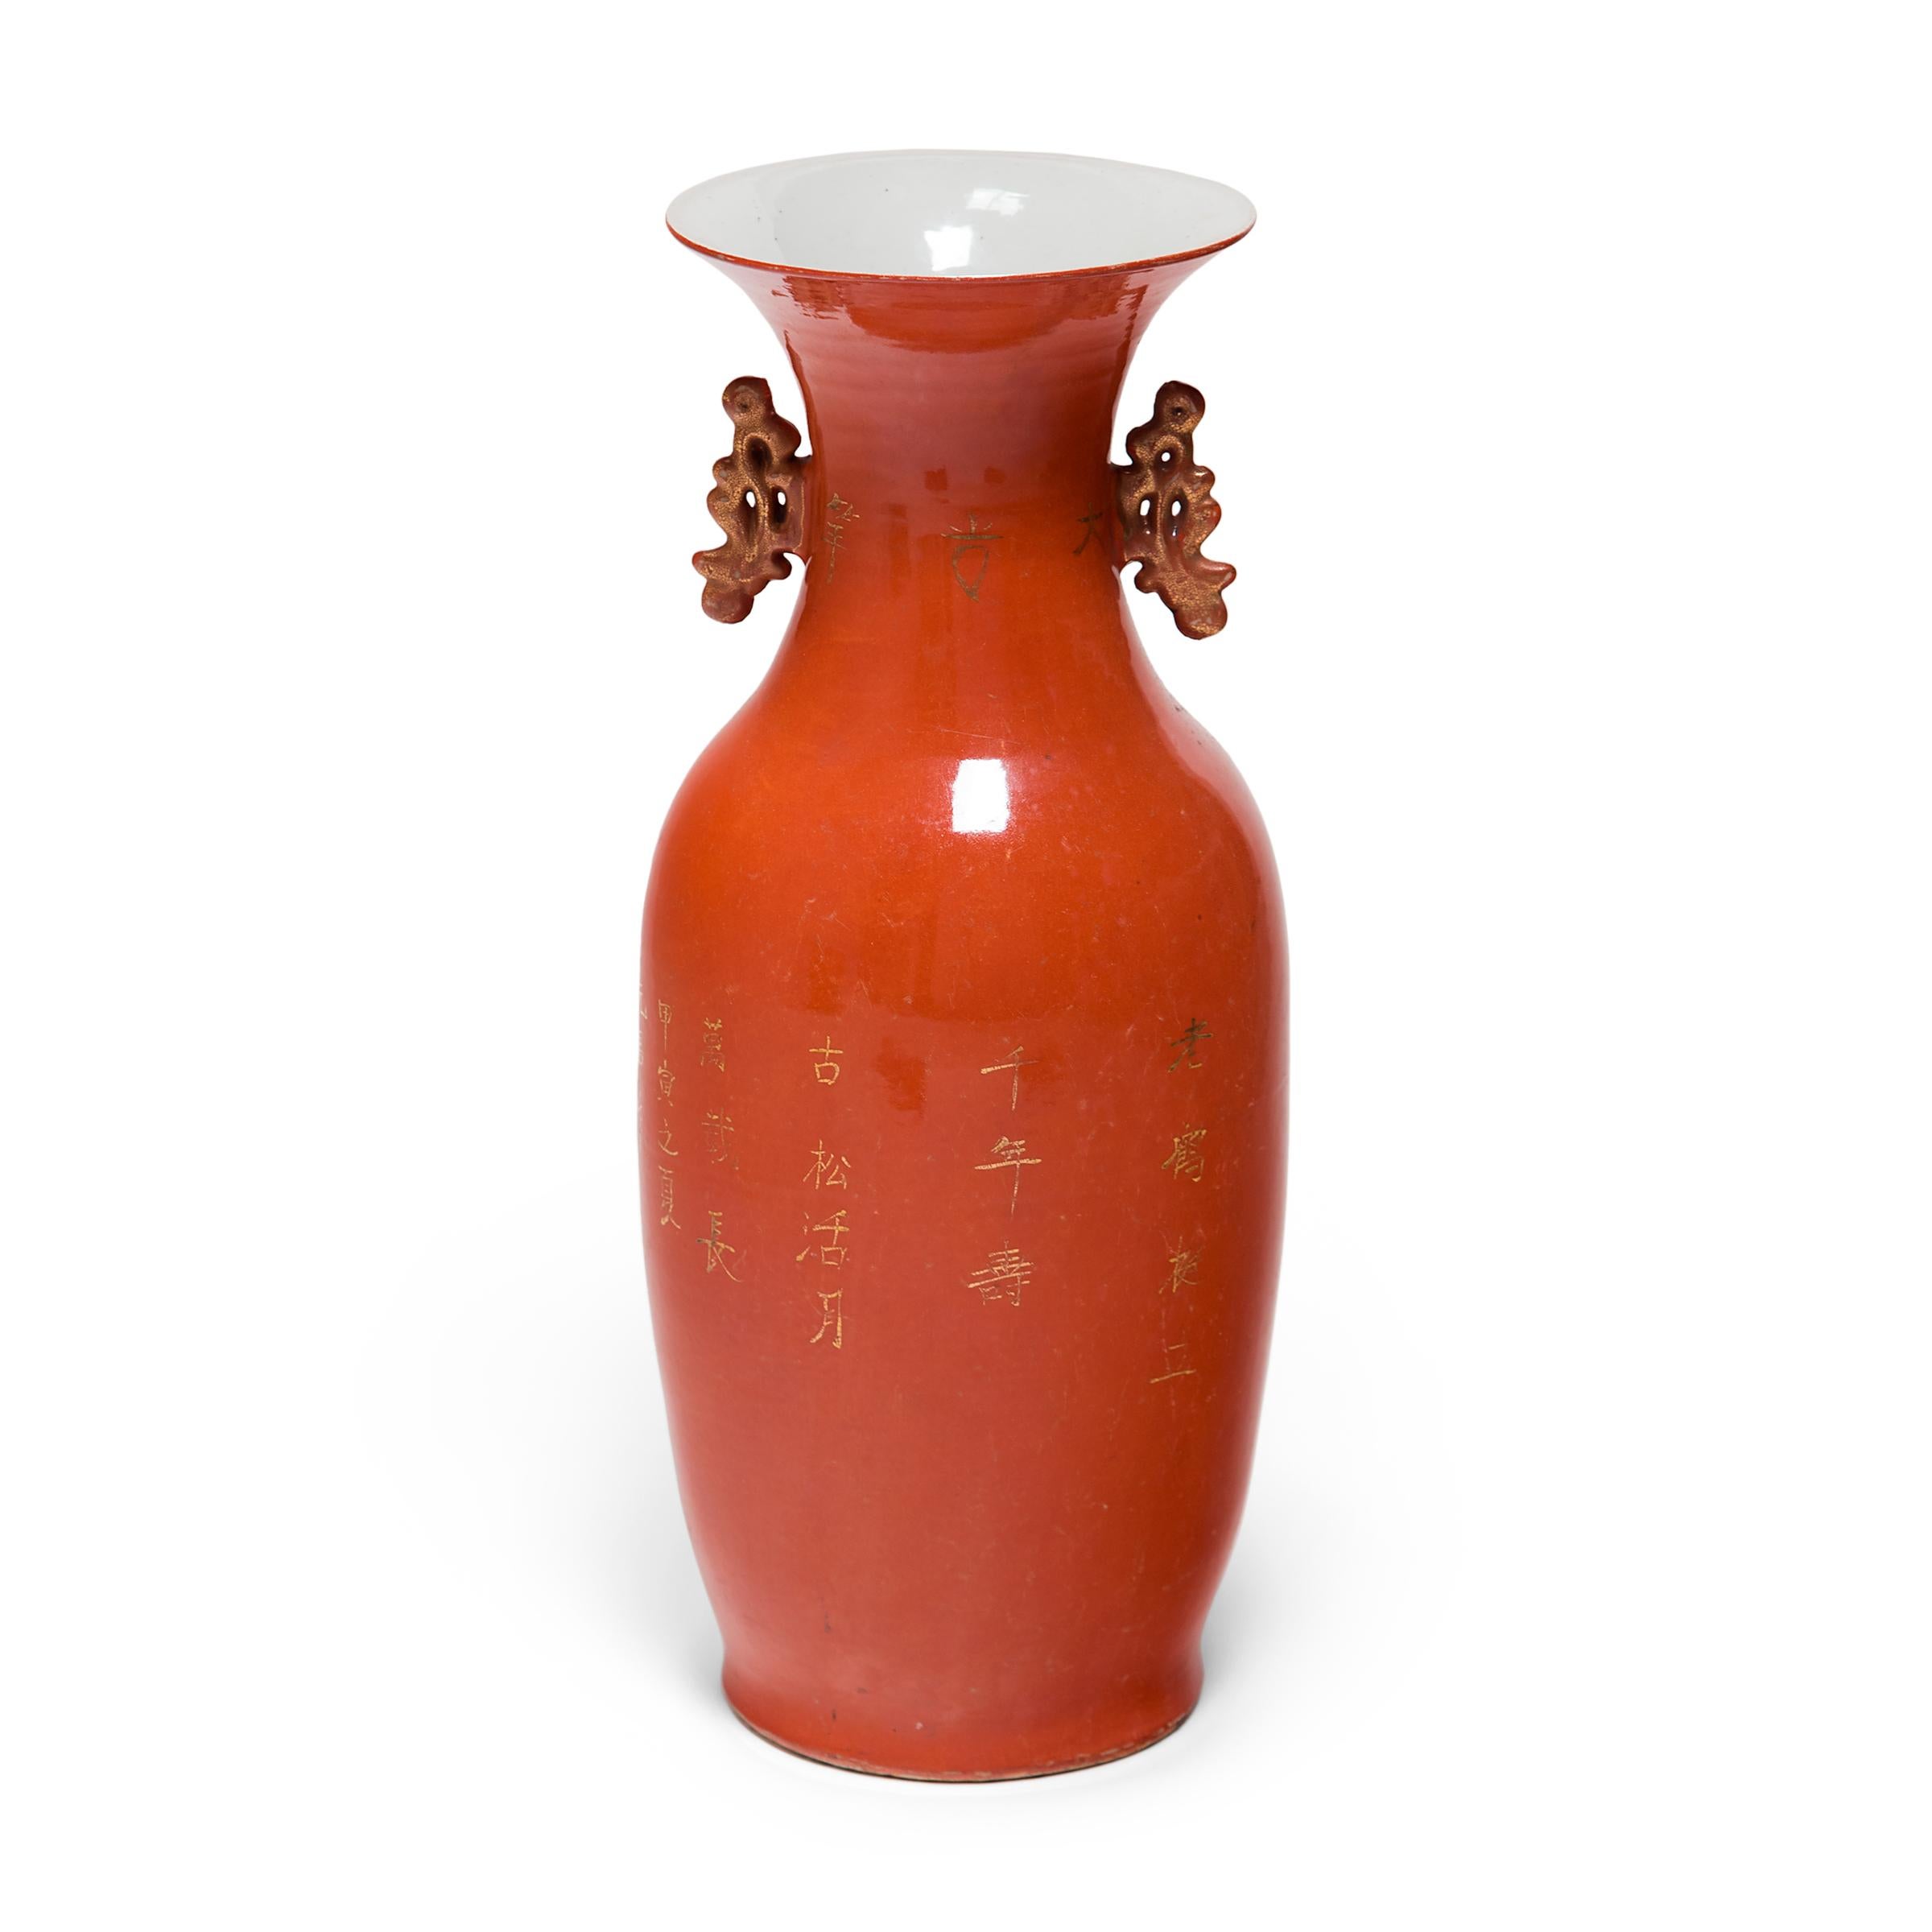 Glazed Chinese Art Deco Persimmon Vase with White Cranes, circa 1920s For Sale